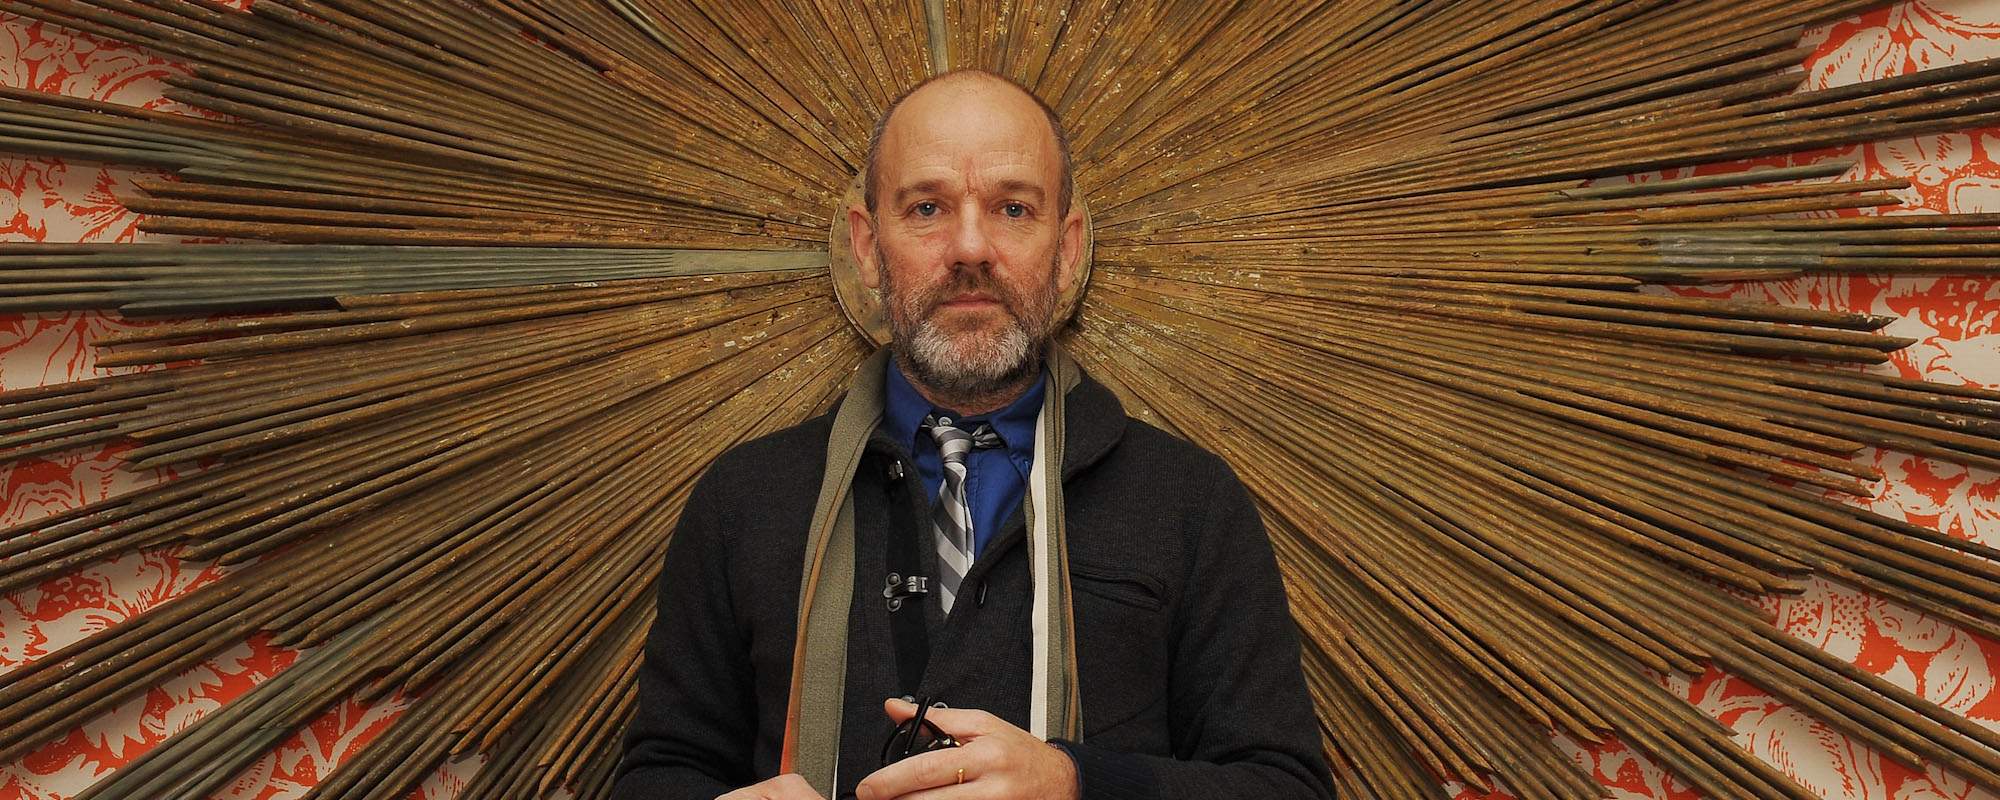 4 Songs You Didn’t Know Michael Stipe Wrote for Other Artists